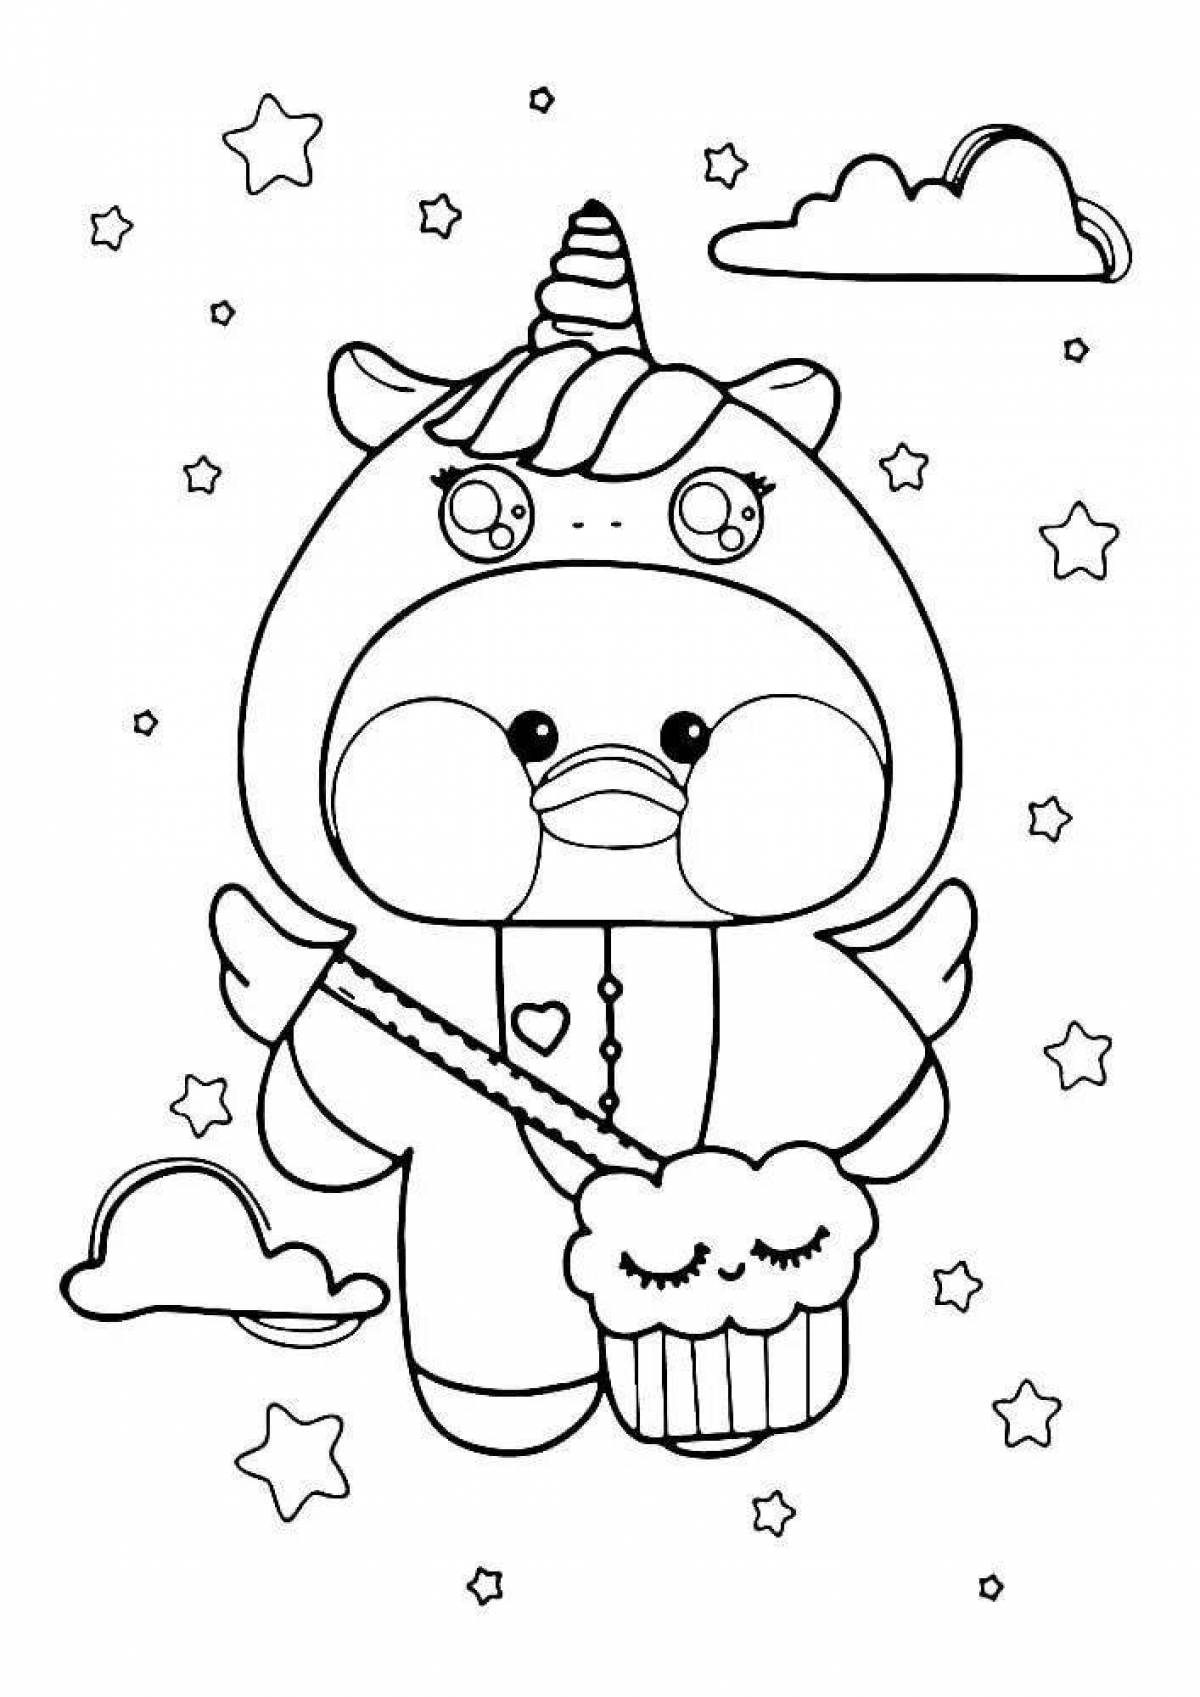 Shiny duck lalyafanfan coloring book